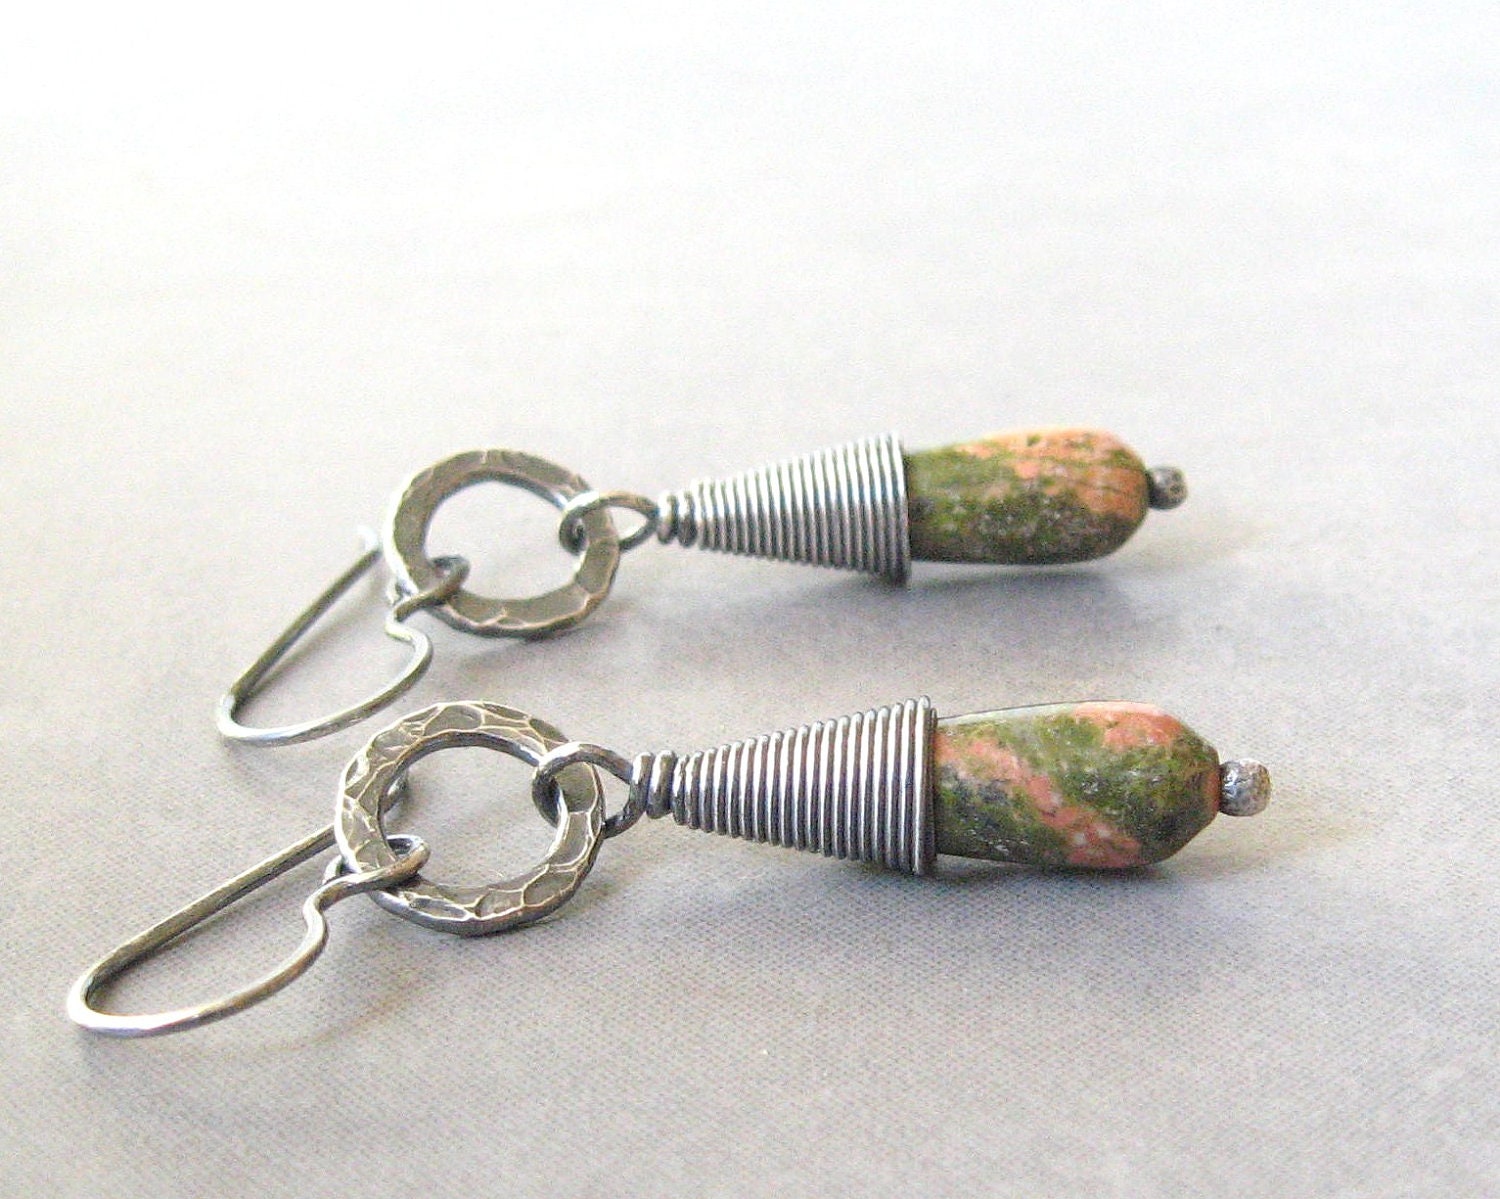 unakite and silver dangle earrings, earthy rustic tribal earrings, sterling ear wires and fine silver rings - theBeadAerie